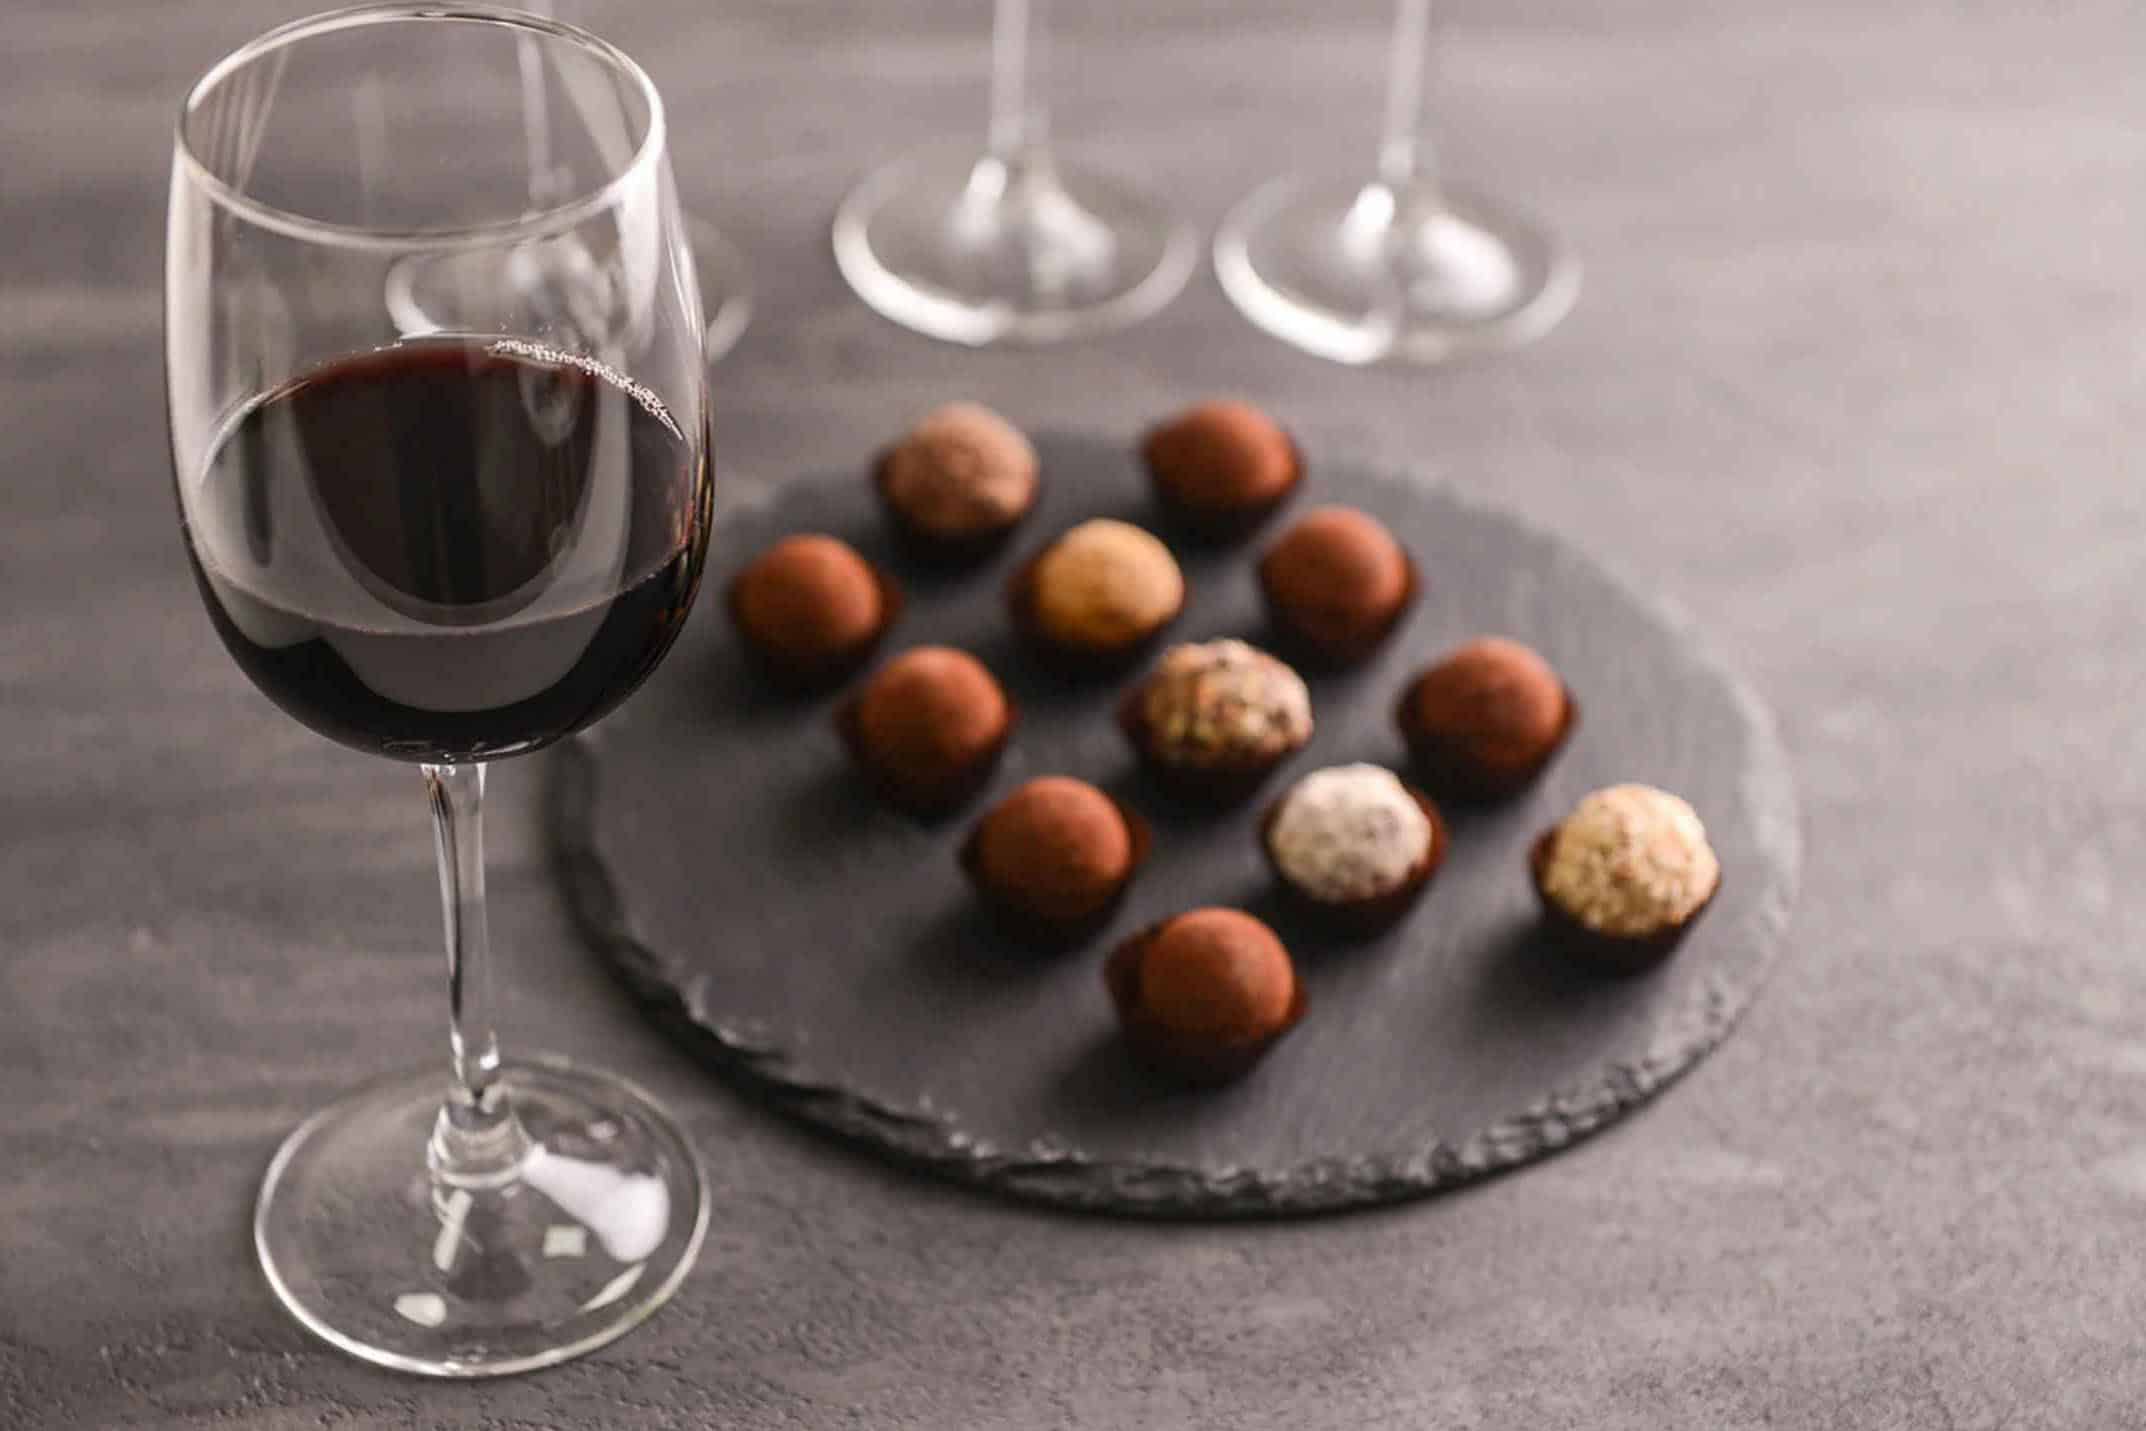 Tips to have Fantastic Wine Pairings with Chocolates